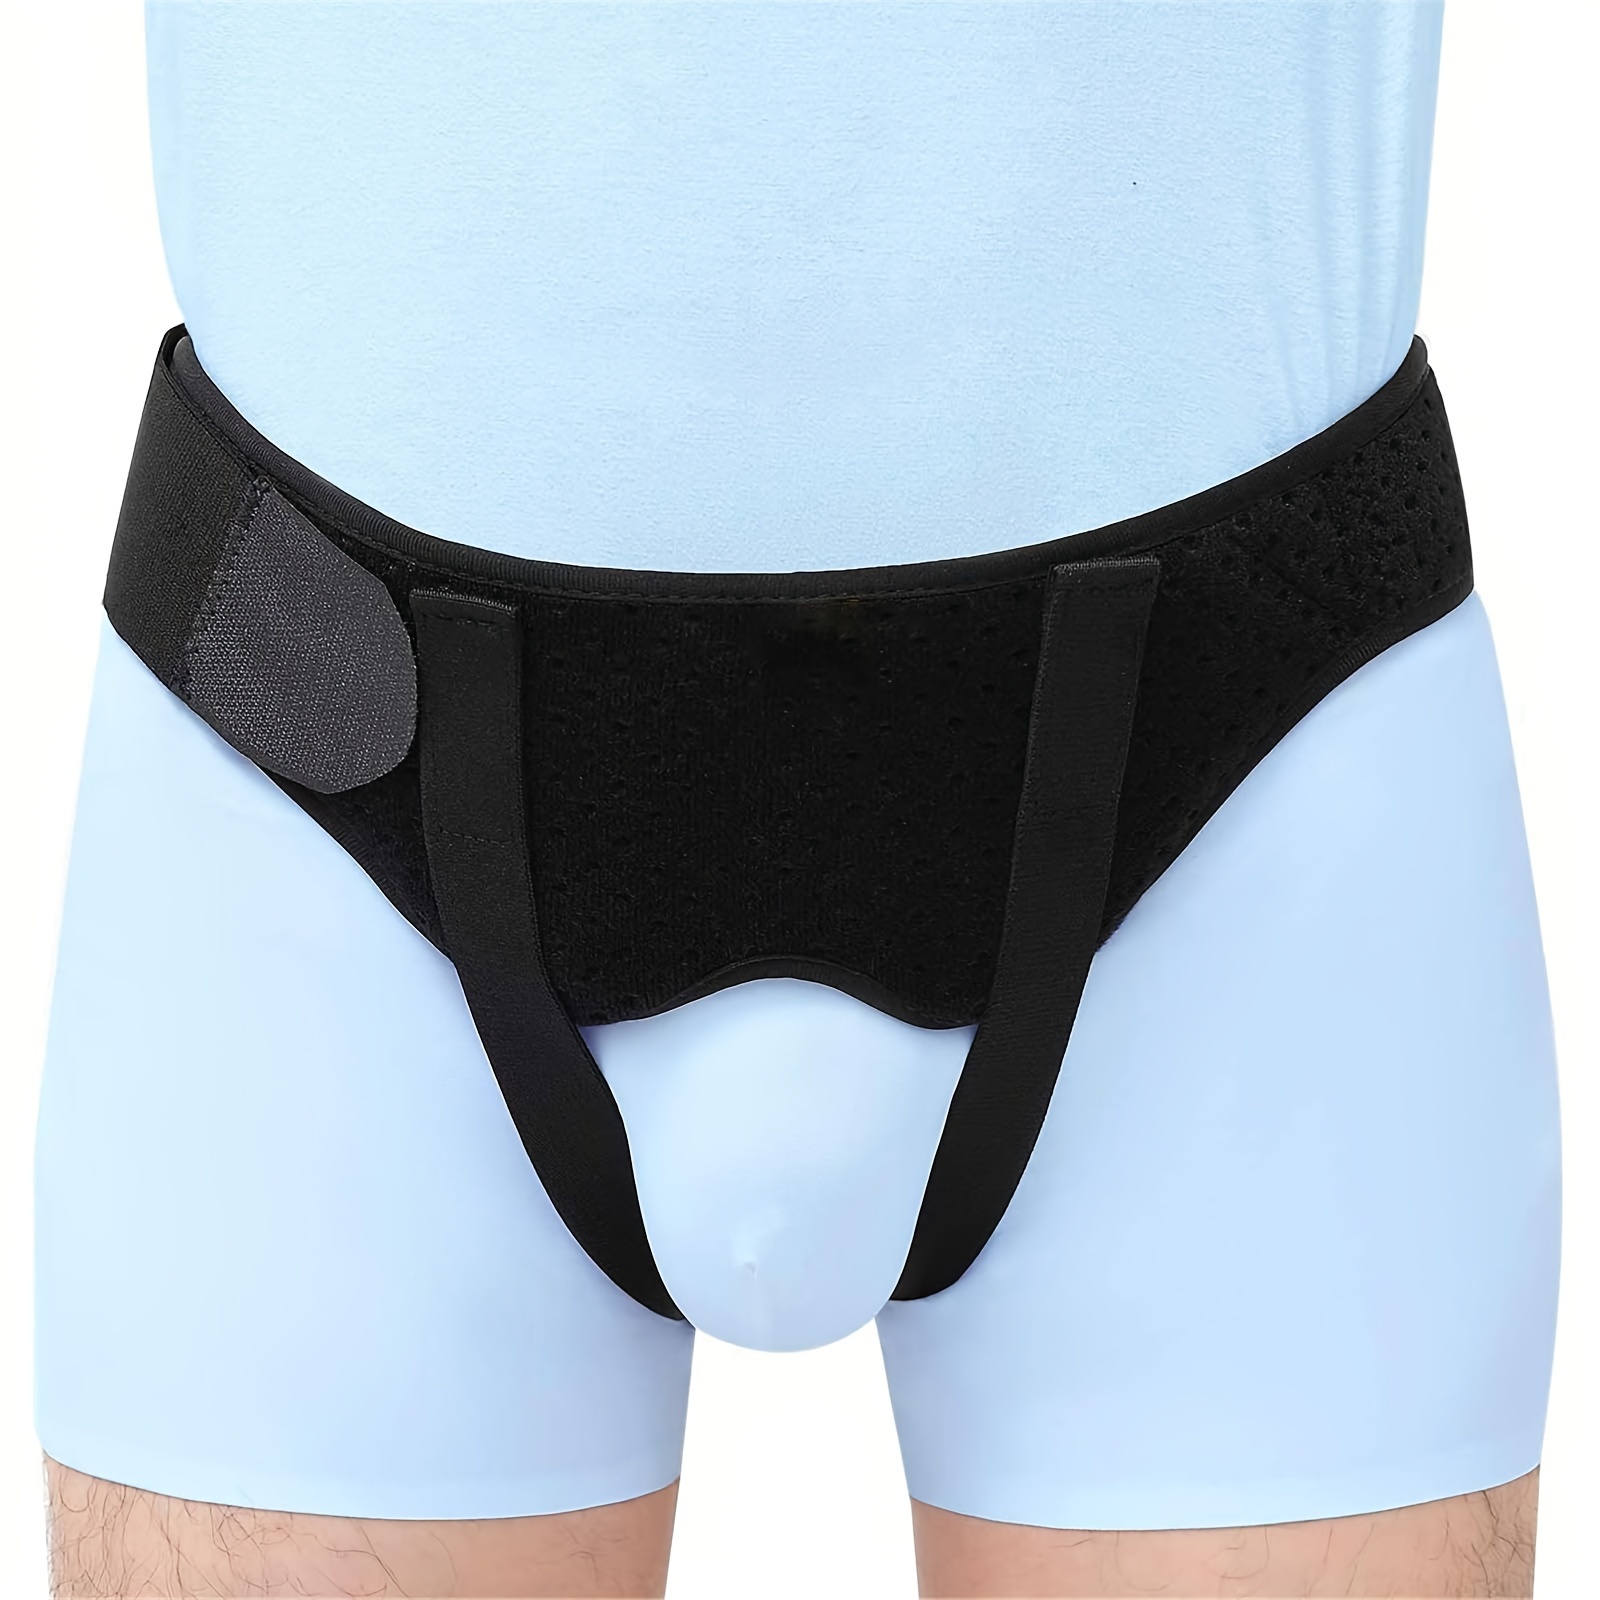 Hernia Belt Truss For Adult Inguinal Or Sports Hernia Support Brace Pain  Relief Recovery Strap With 1 Removable Compression Pad